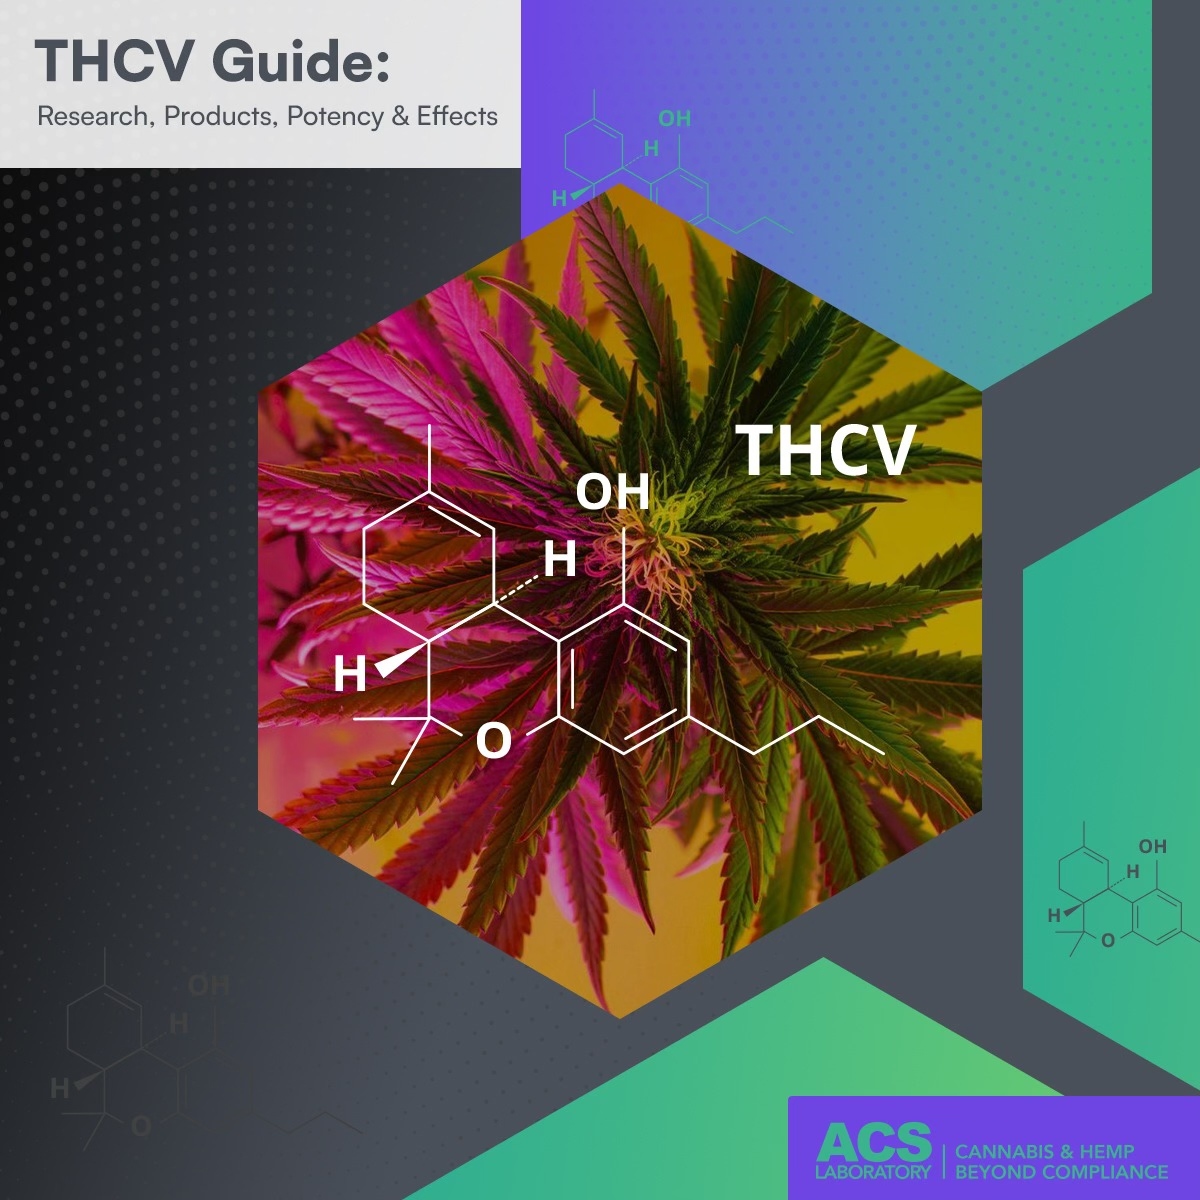 Discover the power of THCV! Similar to THC but with unique properties, THCV offers potential benefits for appetite, mood, and pain regulation.

tinyurl.com/mr44k9da

#THCV #THC #altcannabinoids #hempderived #cannabis #hemp #hemptesting #thirdpartylab #ACS #ACSLaboratory